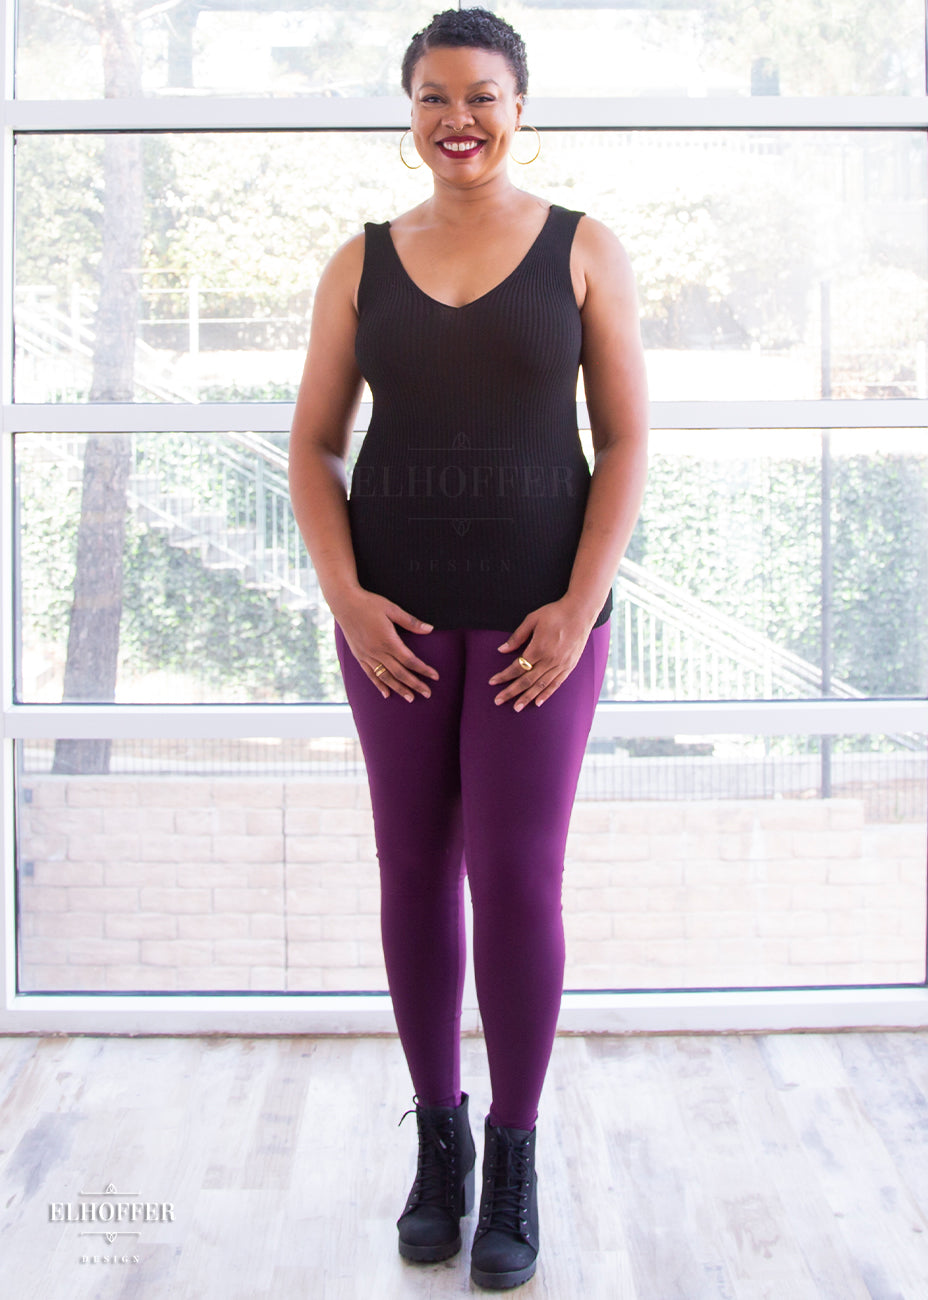 Desiree, a size large medium dark skinned model with very short dark hair, is wearing a pair of high waisted leggings with a seamless front and side seam pockets in plum.